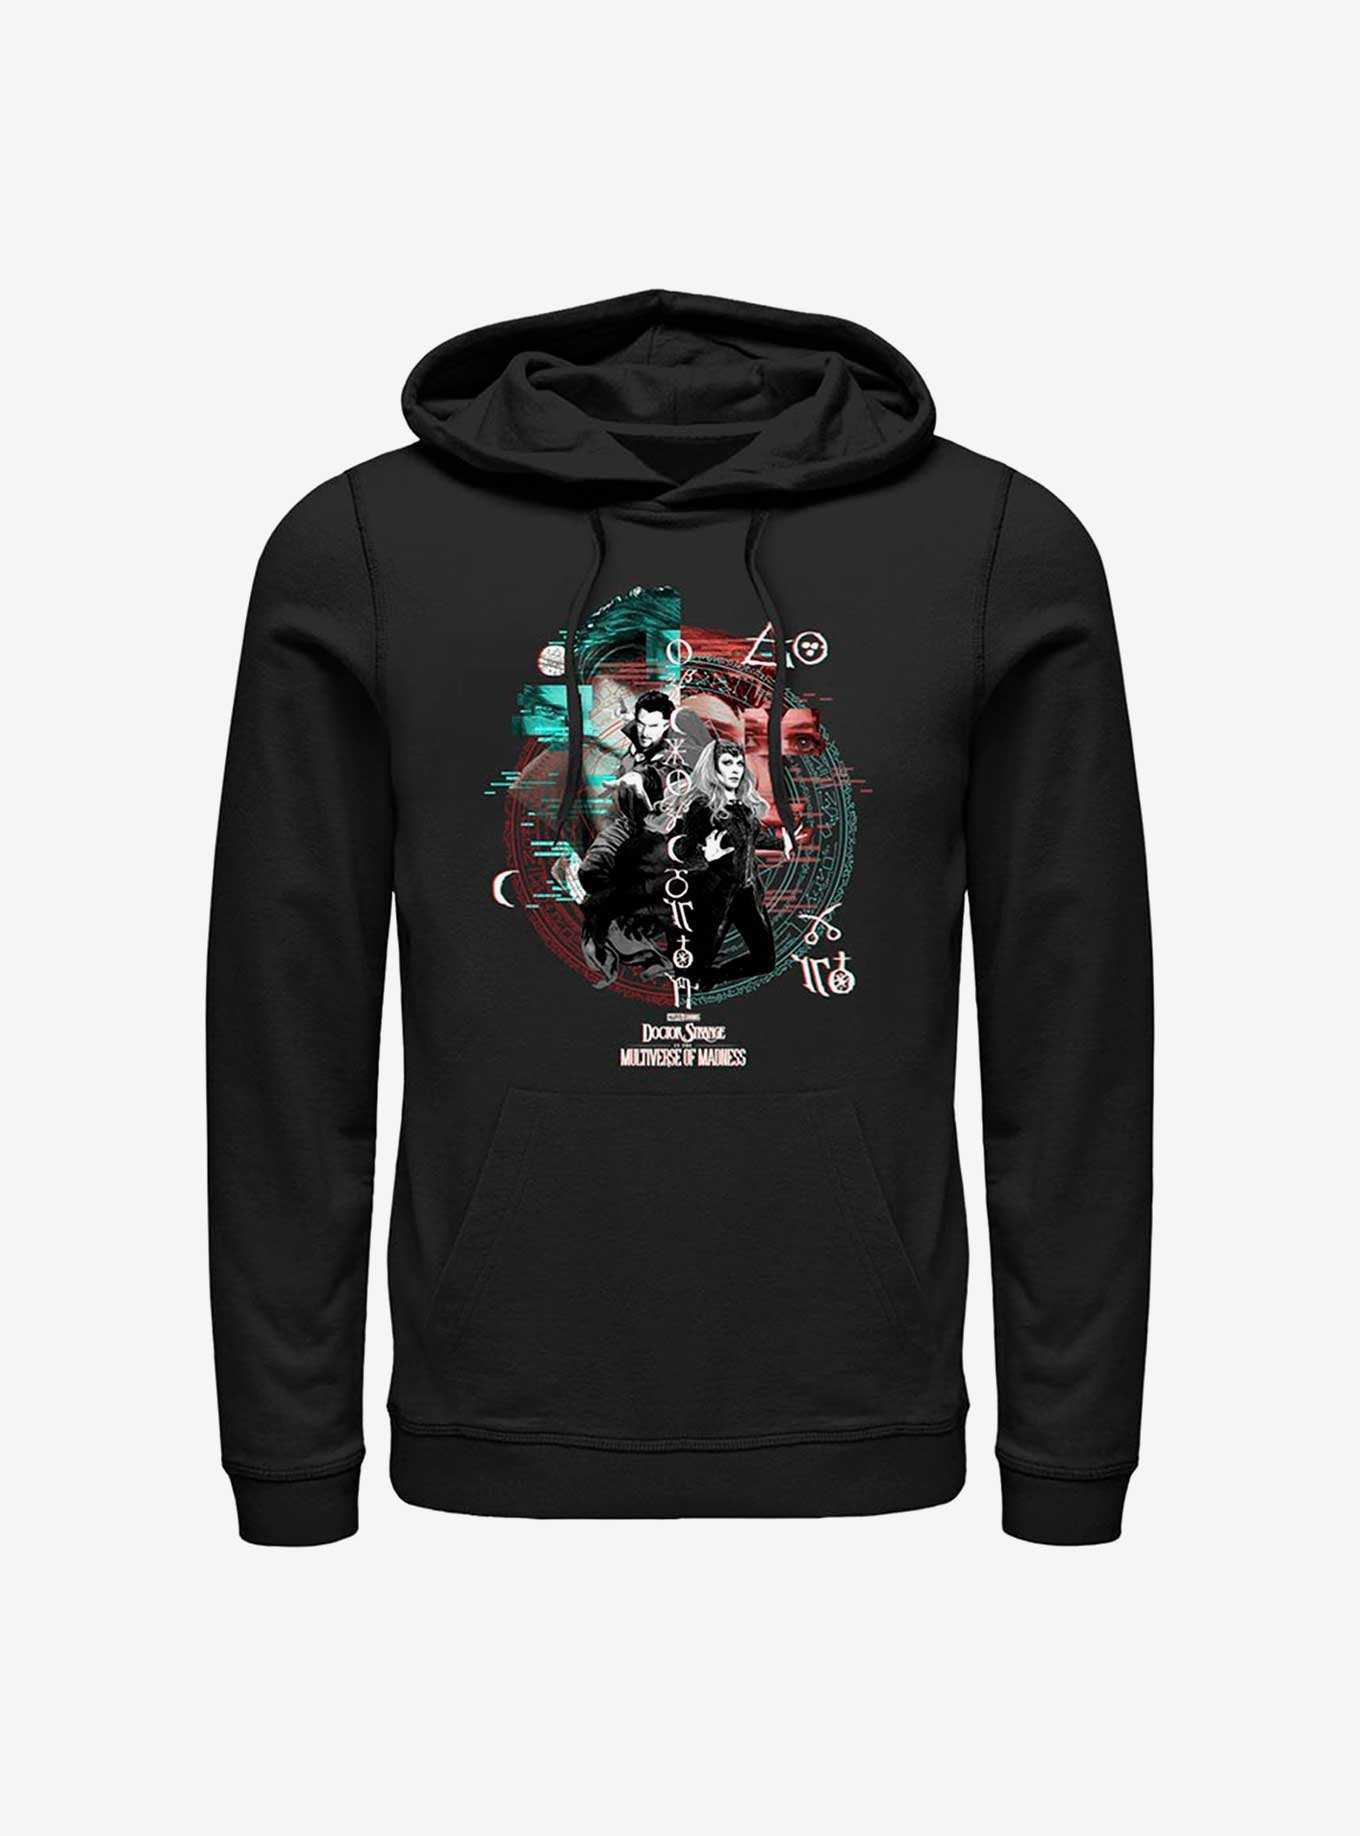 Marvel Doctor Strange In The Multiverse of Madness Magic Glitch Hoodie, , hi-res